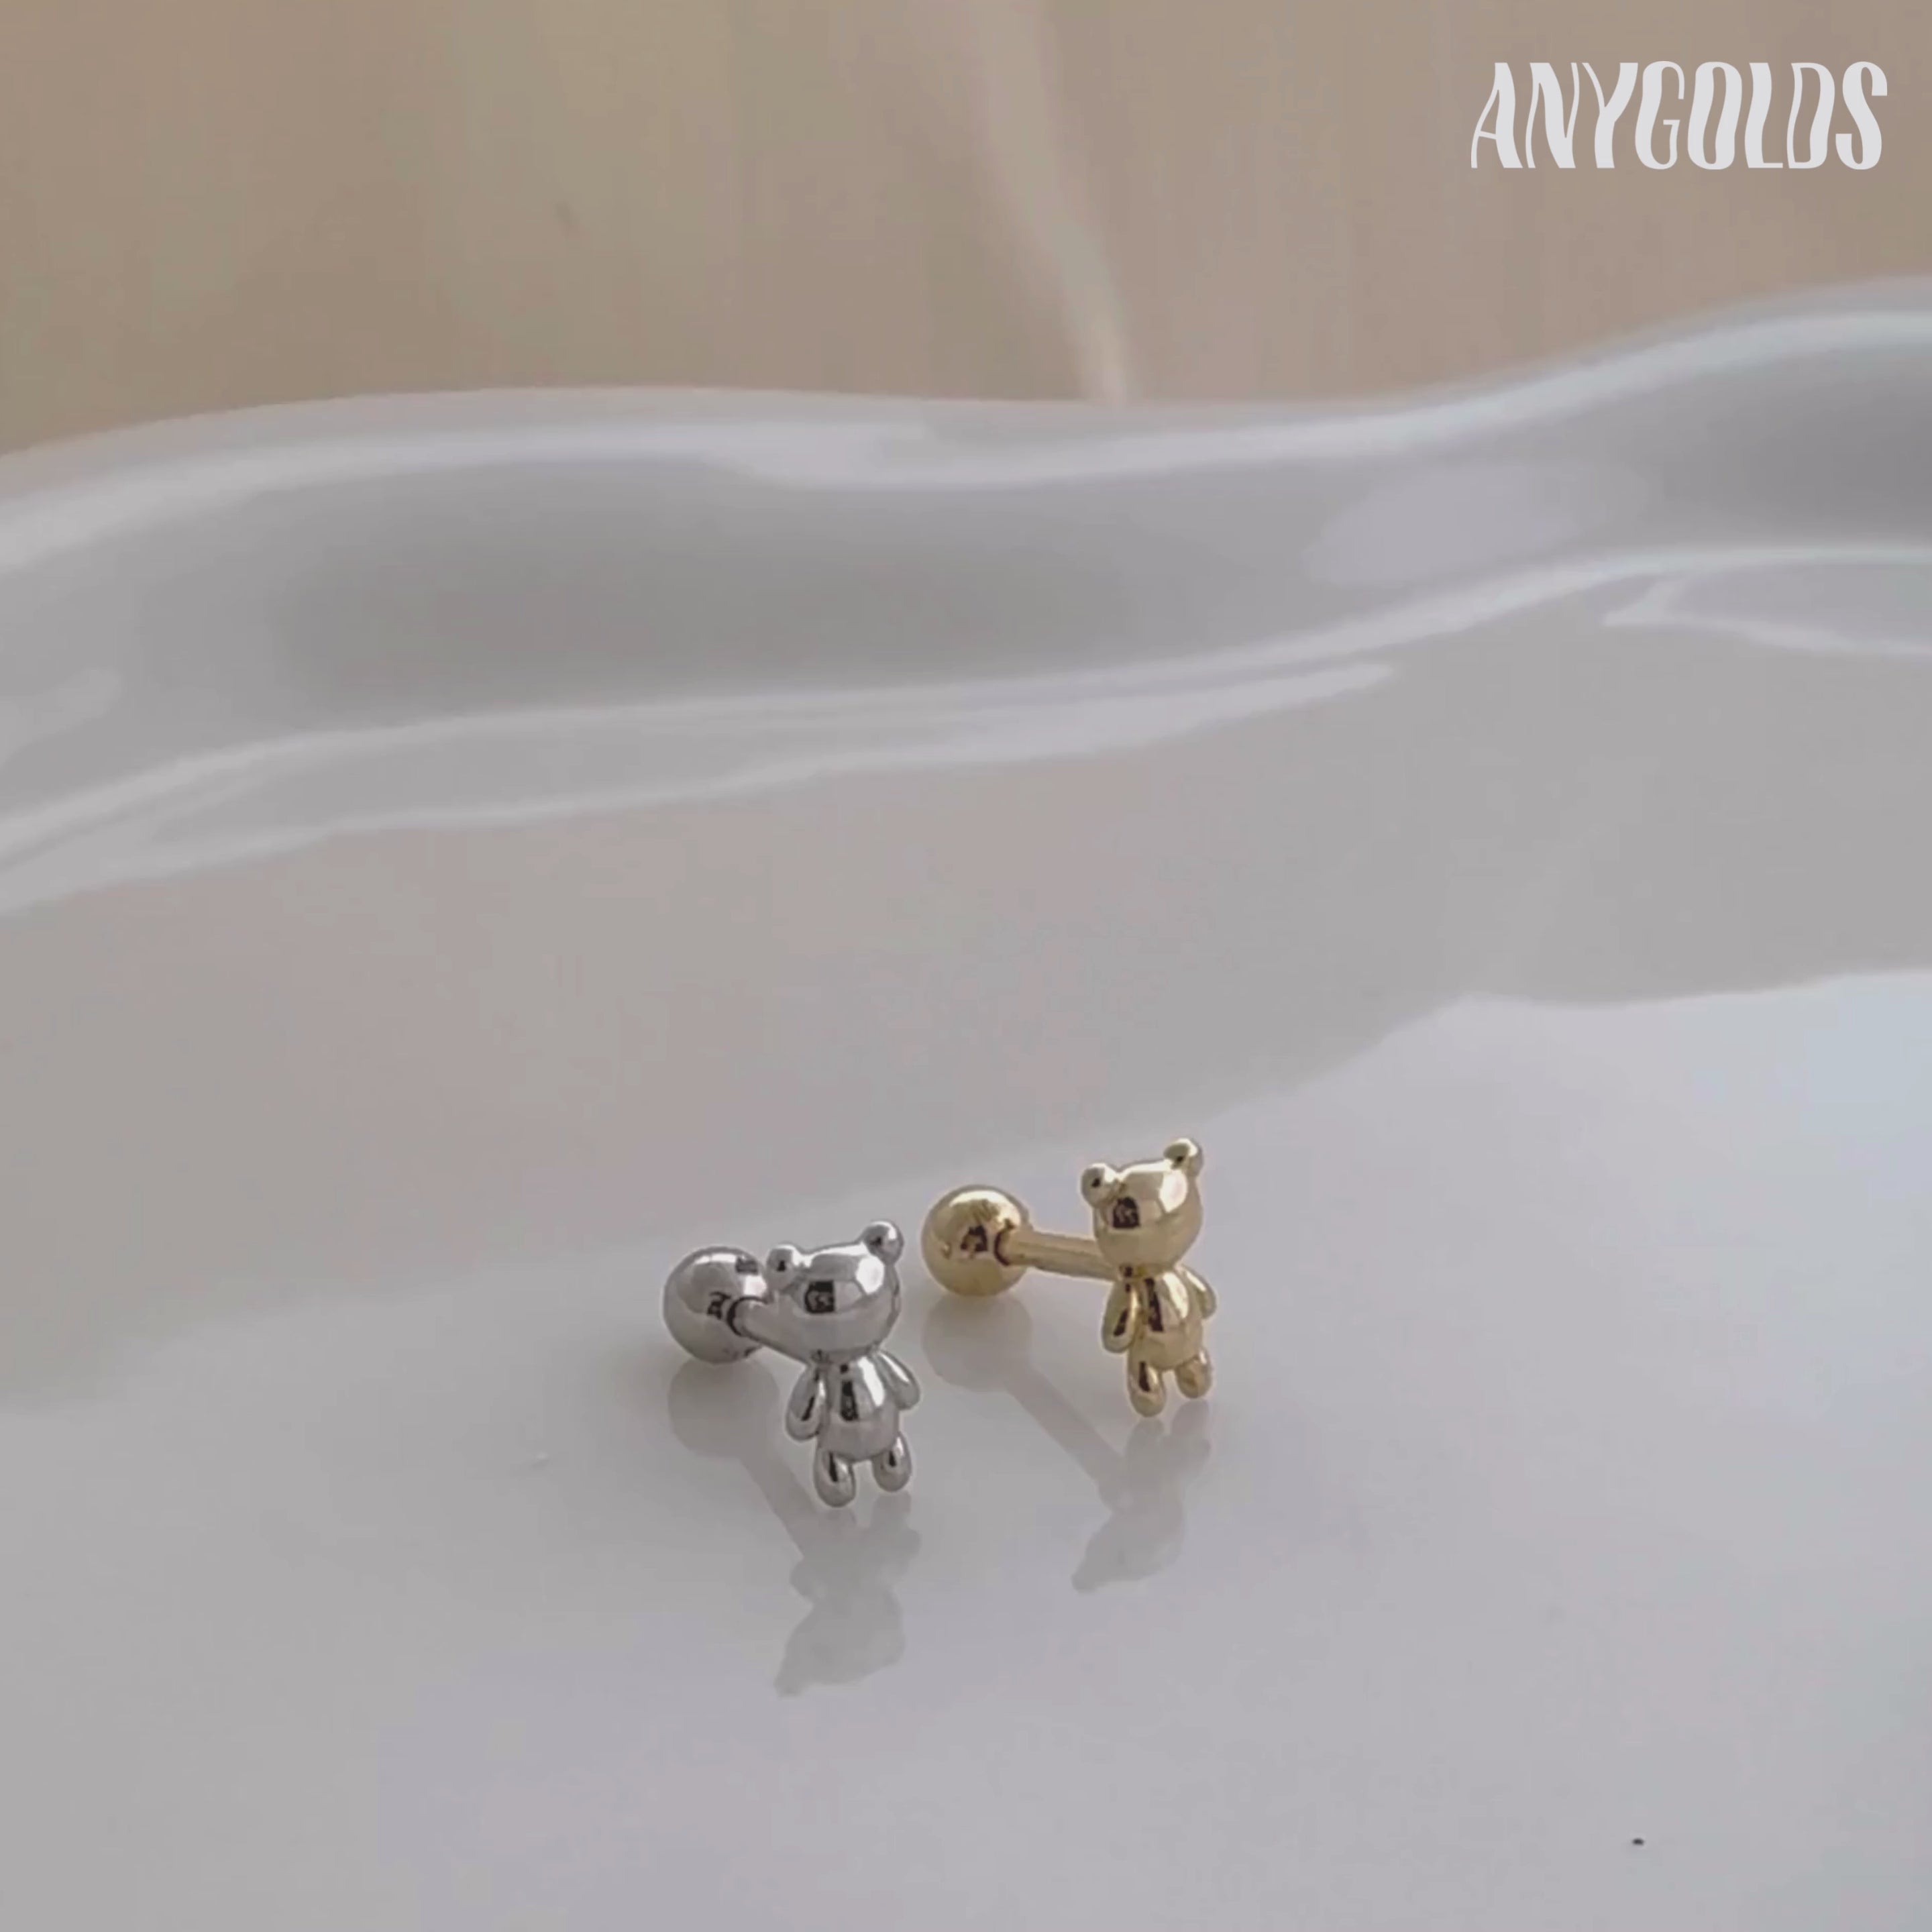 14K Solid Gold Teddy Bear Stud Piercing Earring - Anygolds 